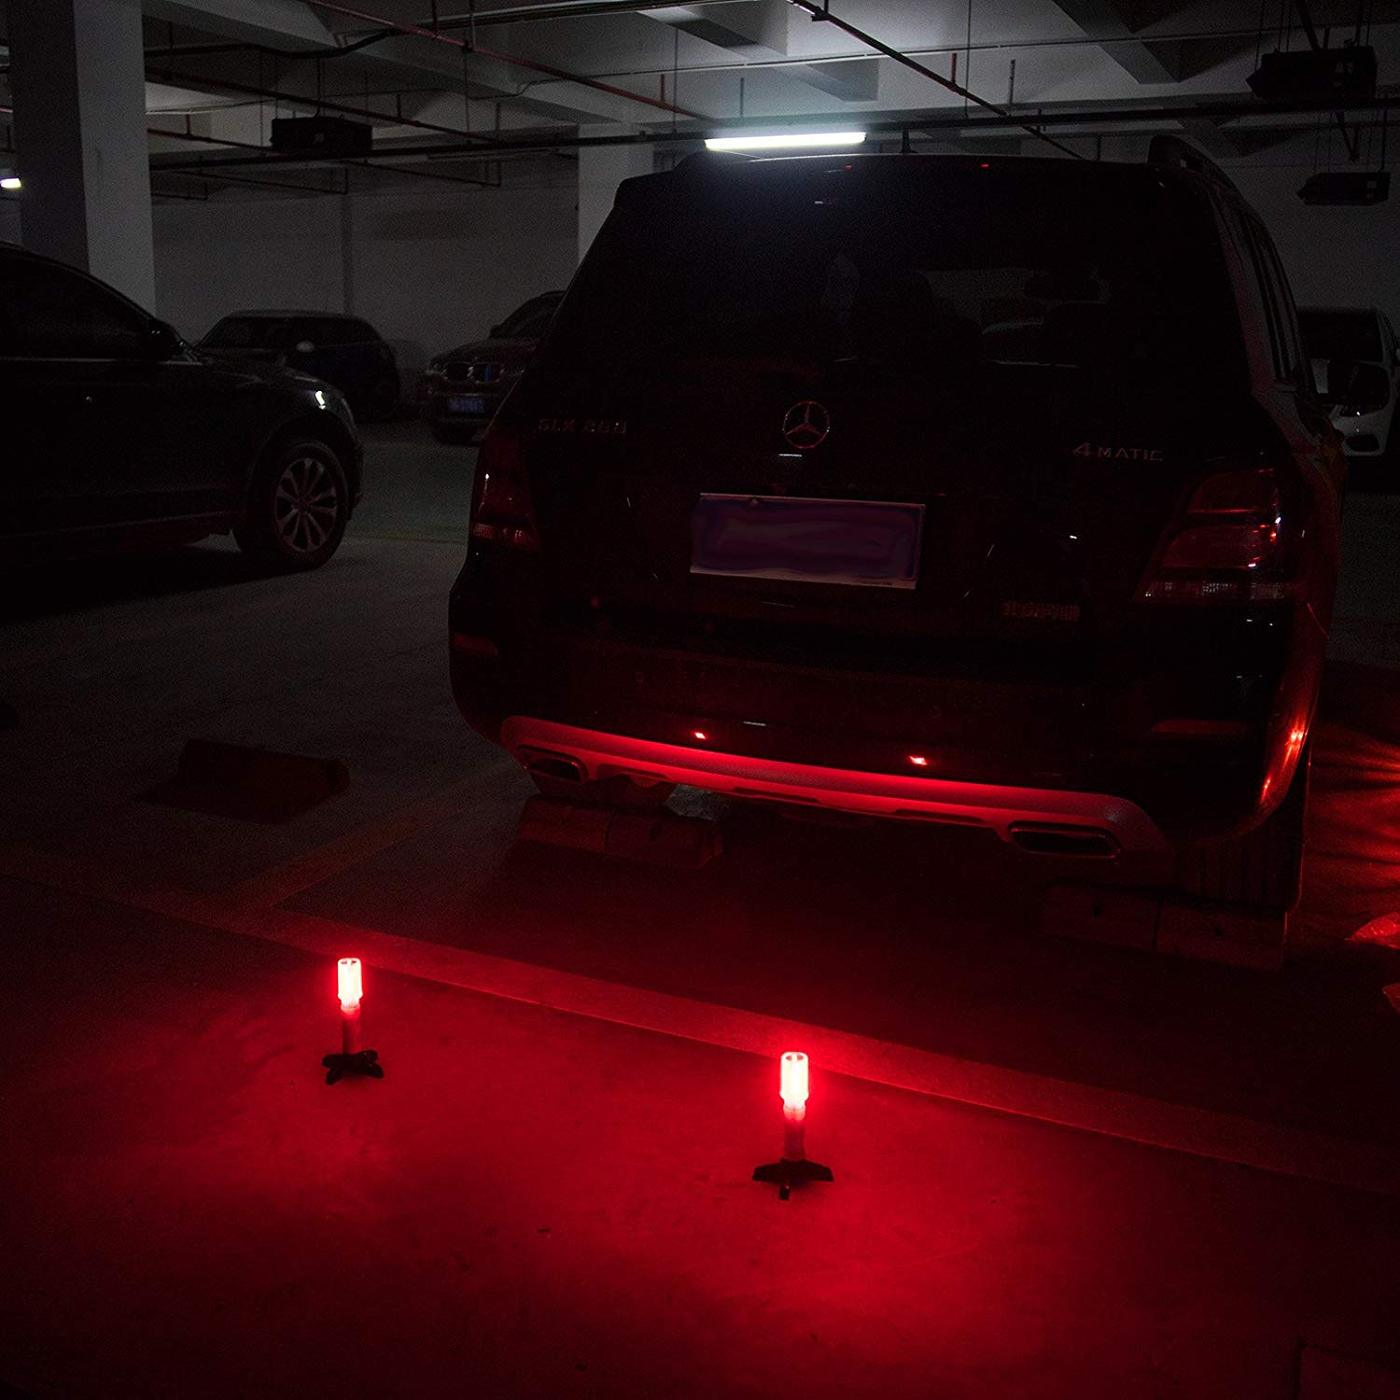 Dark Red 3-Light Mode Road Security Flashing Strobe Light for Emergency Situations